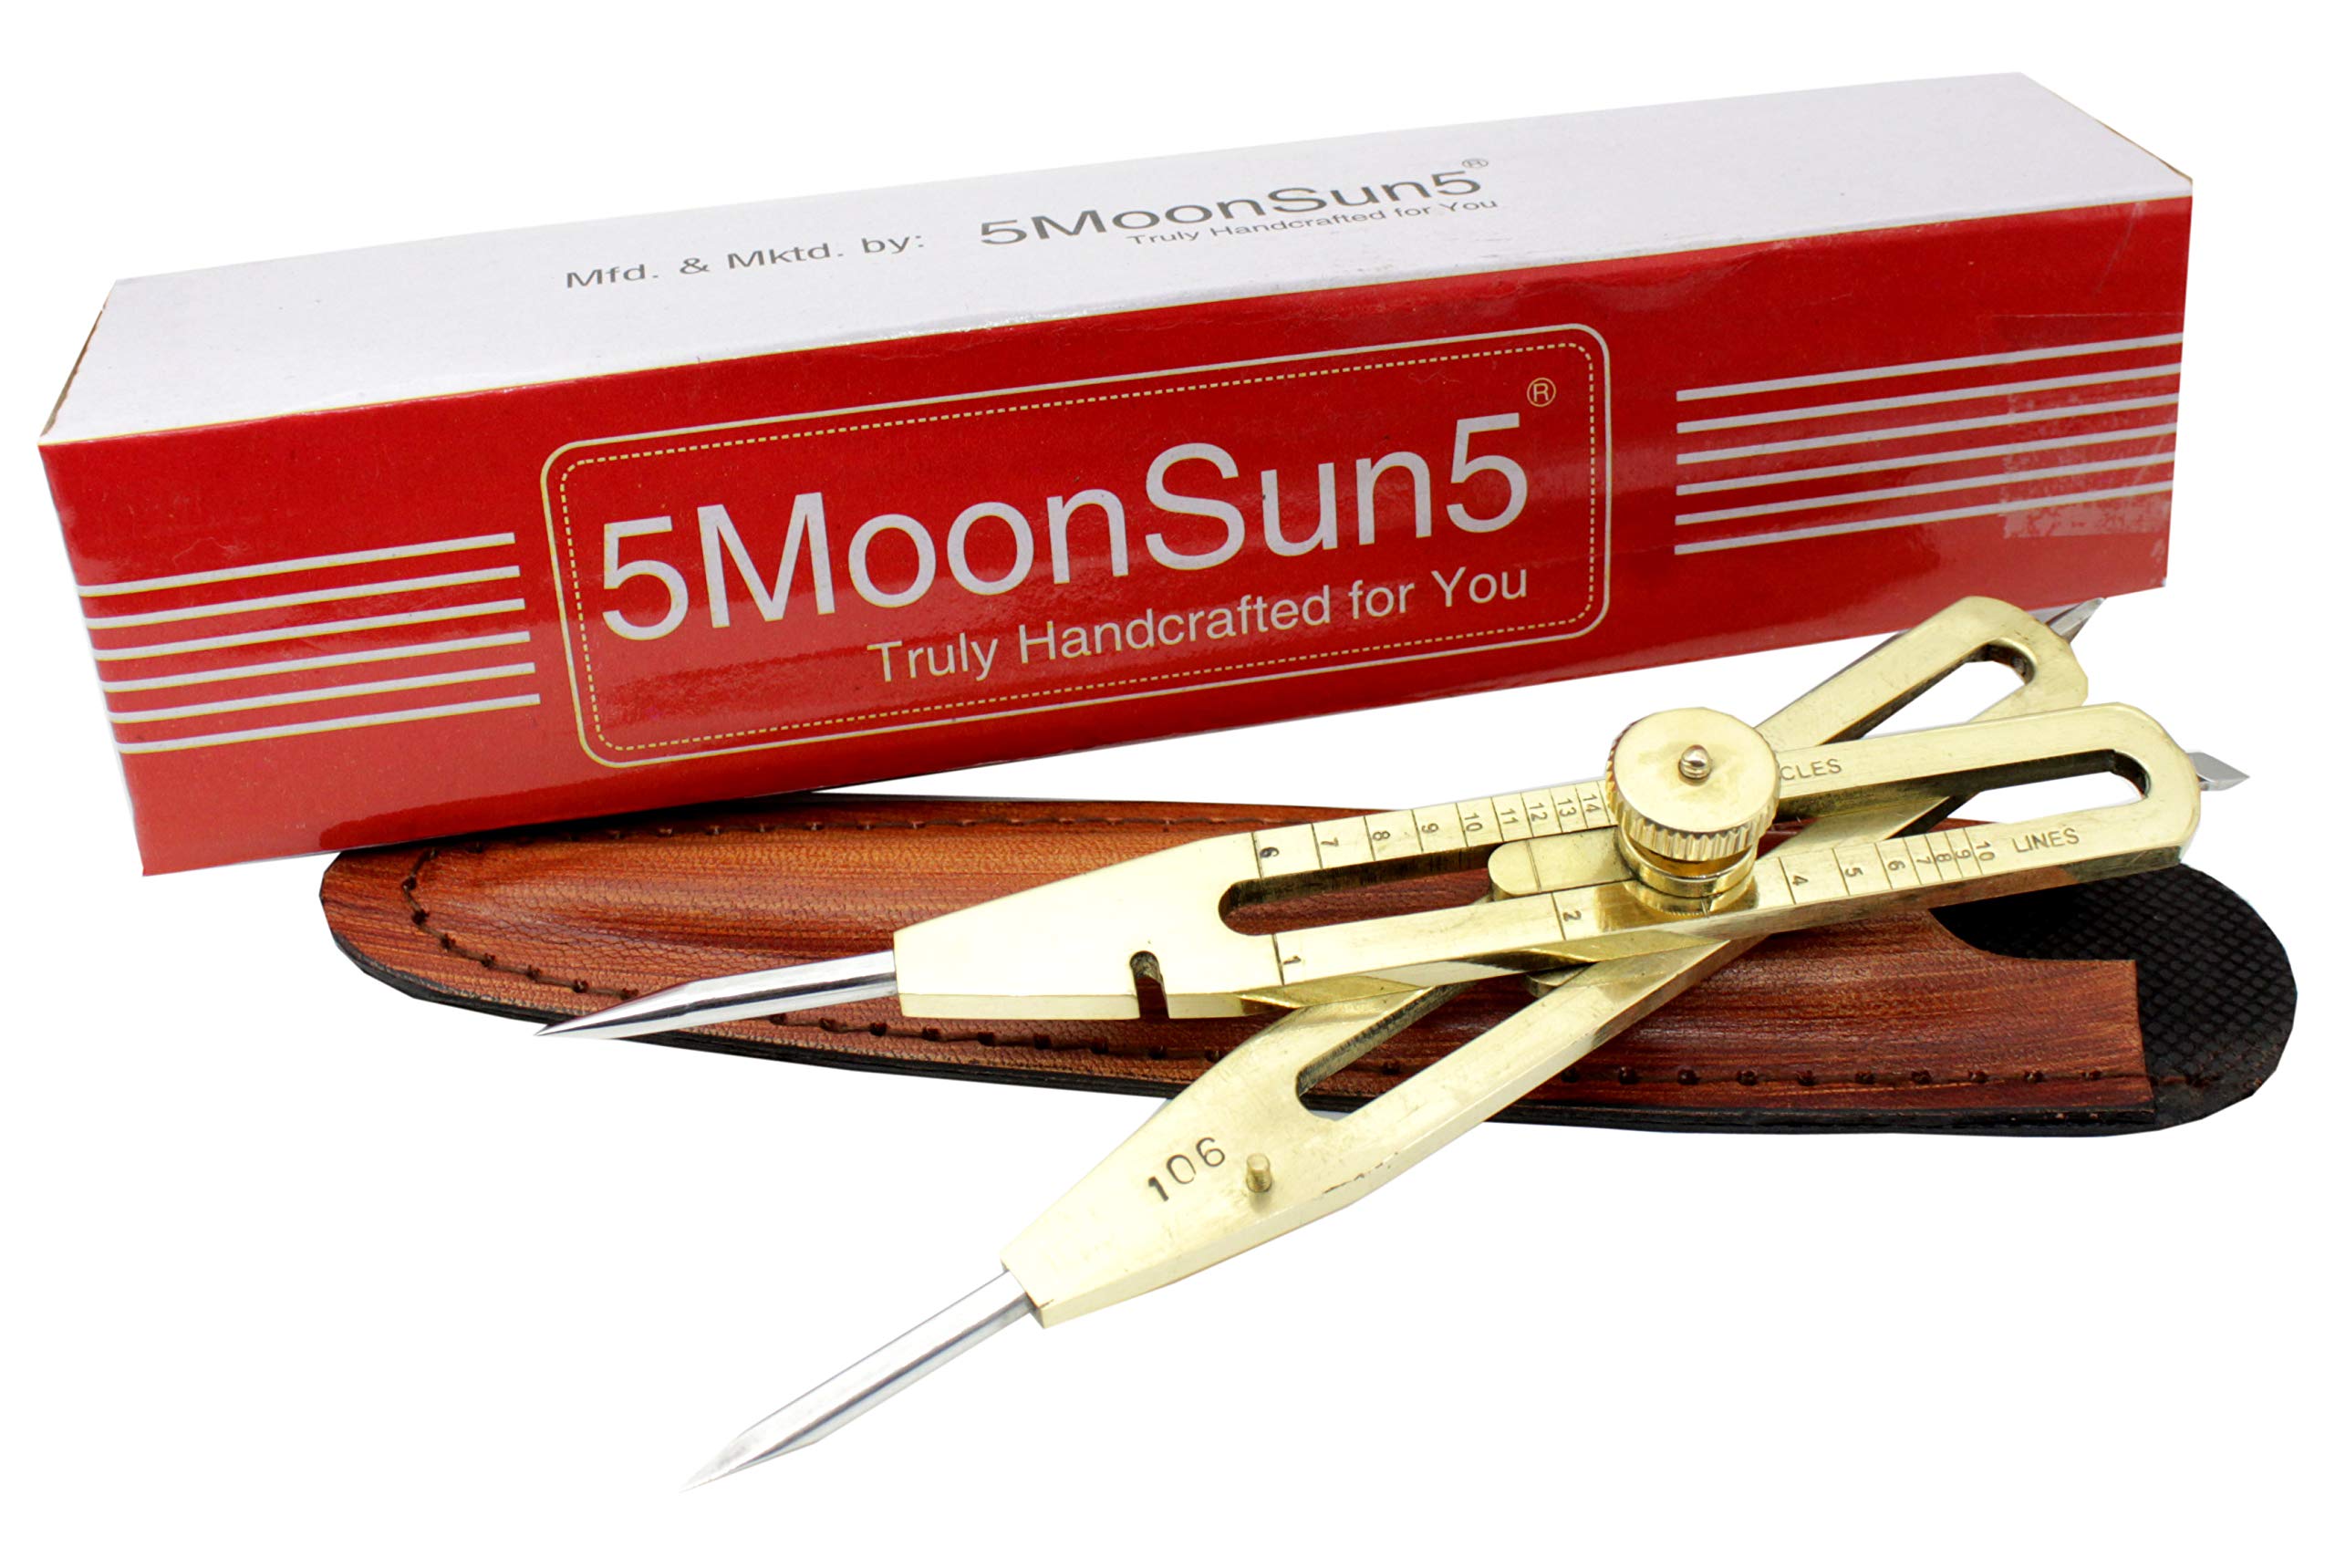 5MoonSun5's Full Brass Compass Ideal for Geometry, Compass Drawing